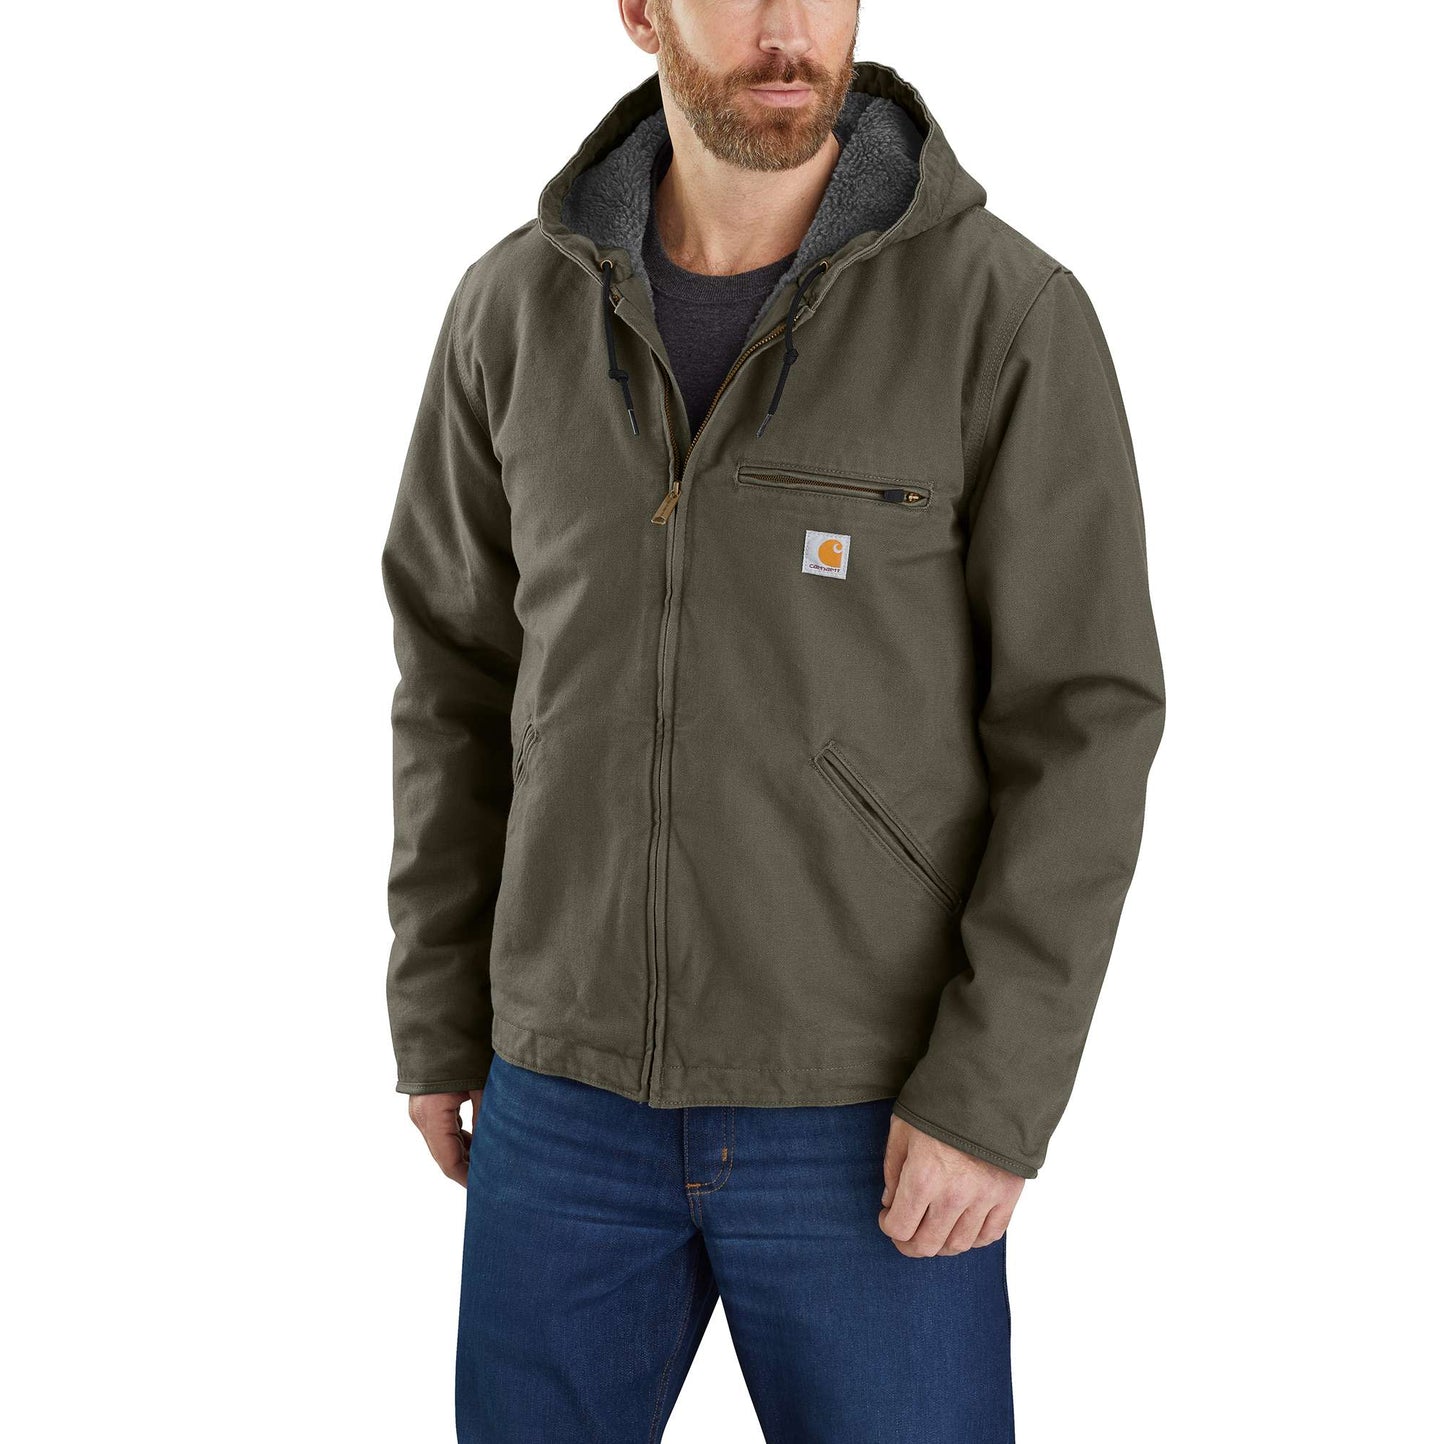 Relaxed Fit Washed Duck Sherpa-Lined Jacket - 3 Warmest Rating ...